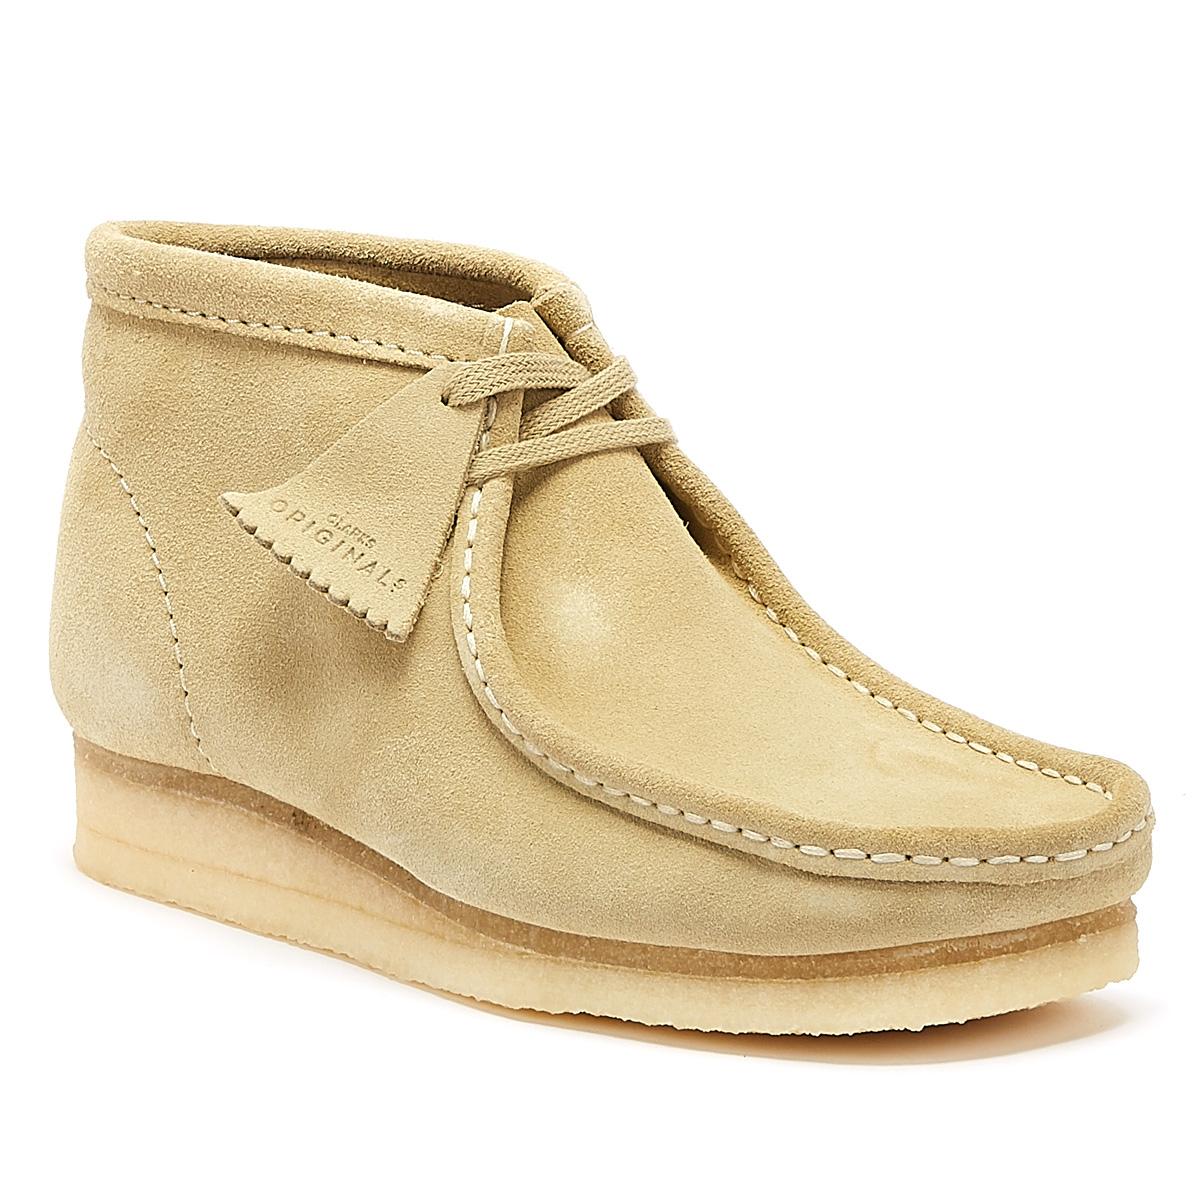 Clarks Wallabee Mens Maple Suede Boots in Beige (Natural) for Men - Lyst